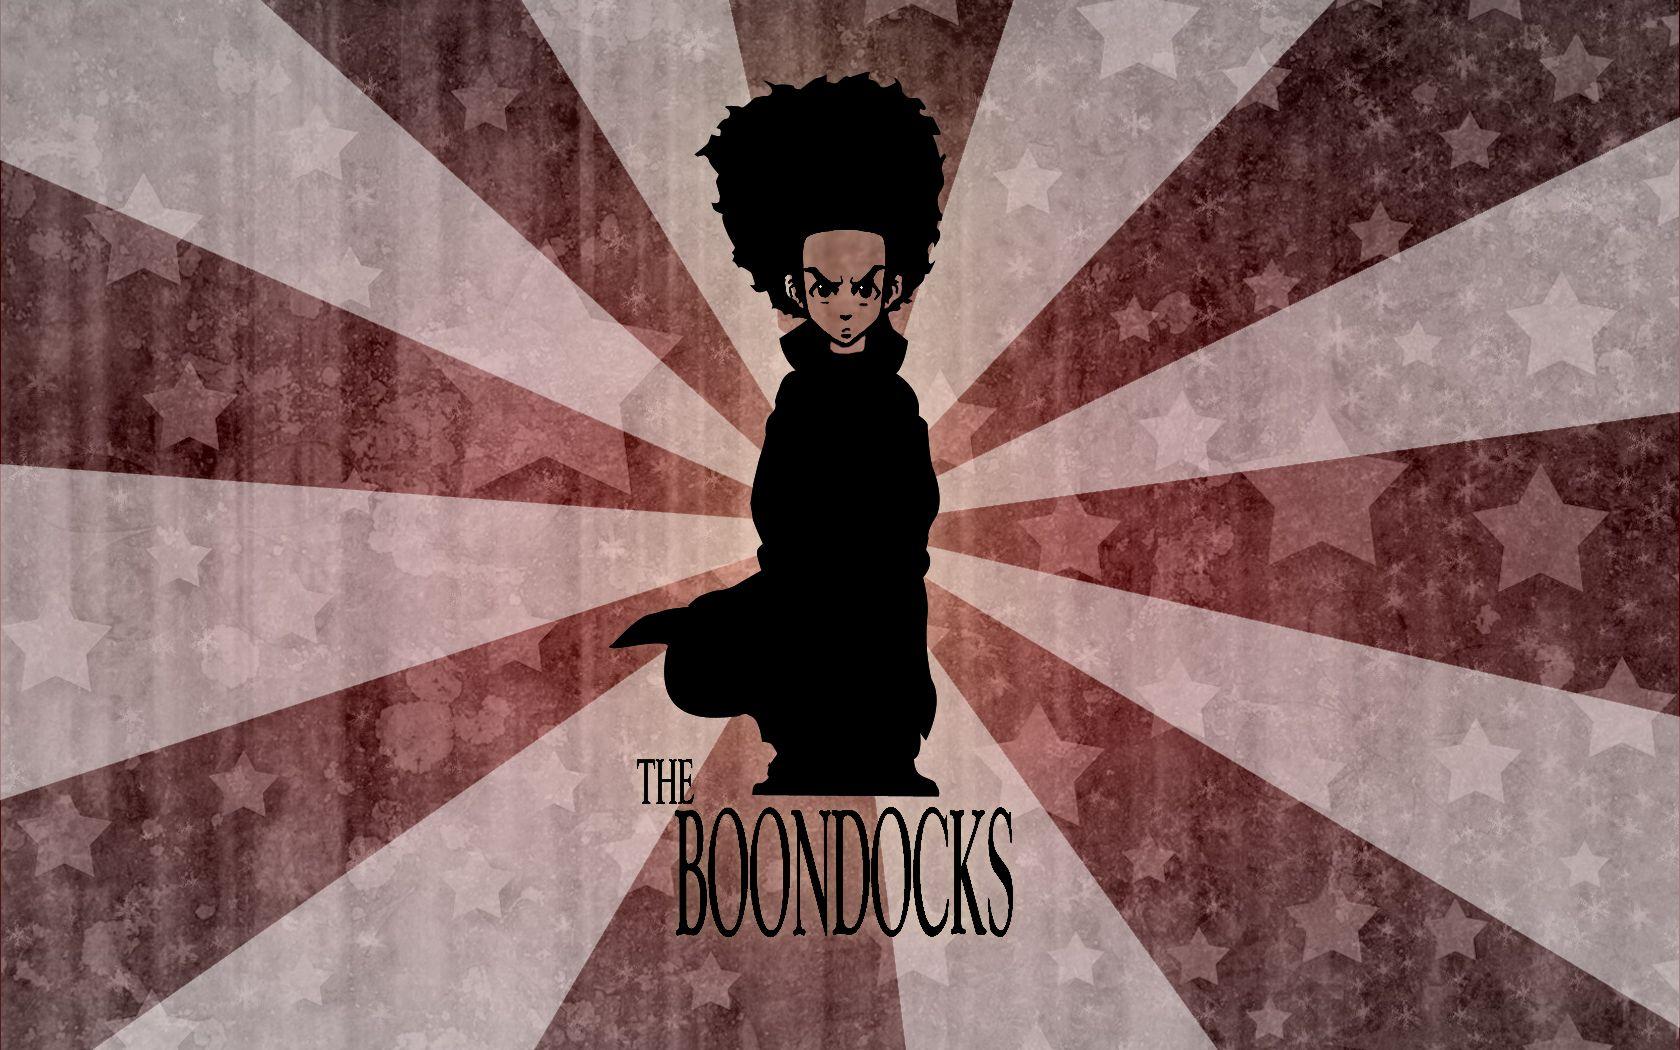 Download wallpaper for 2048x1152 resolution. The Boondocks HD